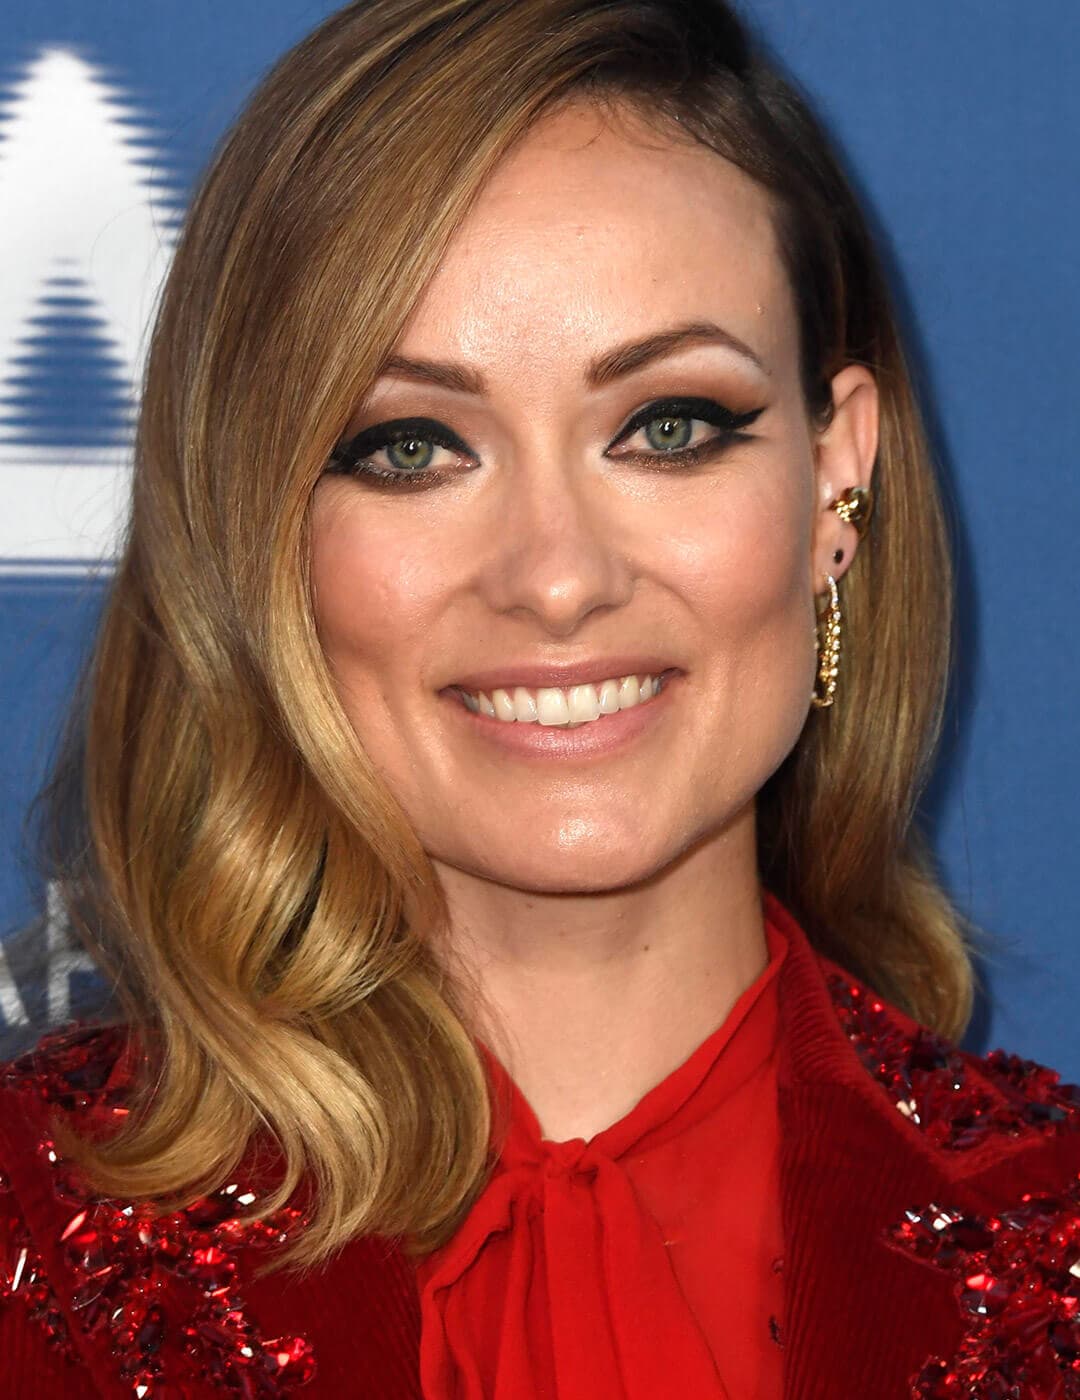 Smiling Olivia Wilde rocking a red sequined dress and smudged double wing eyeliner look